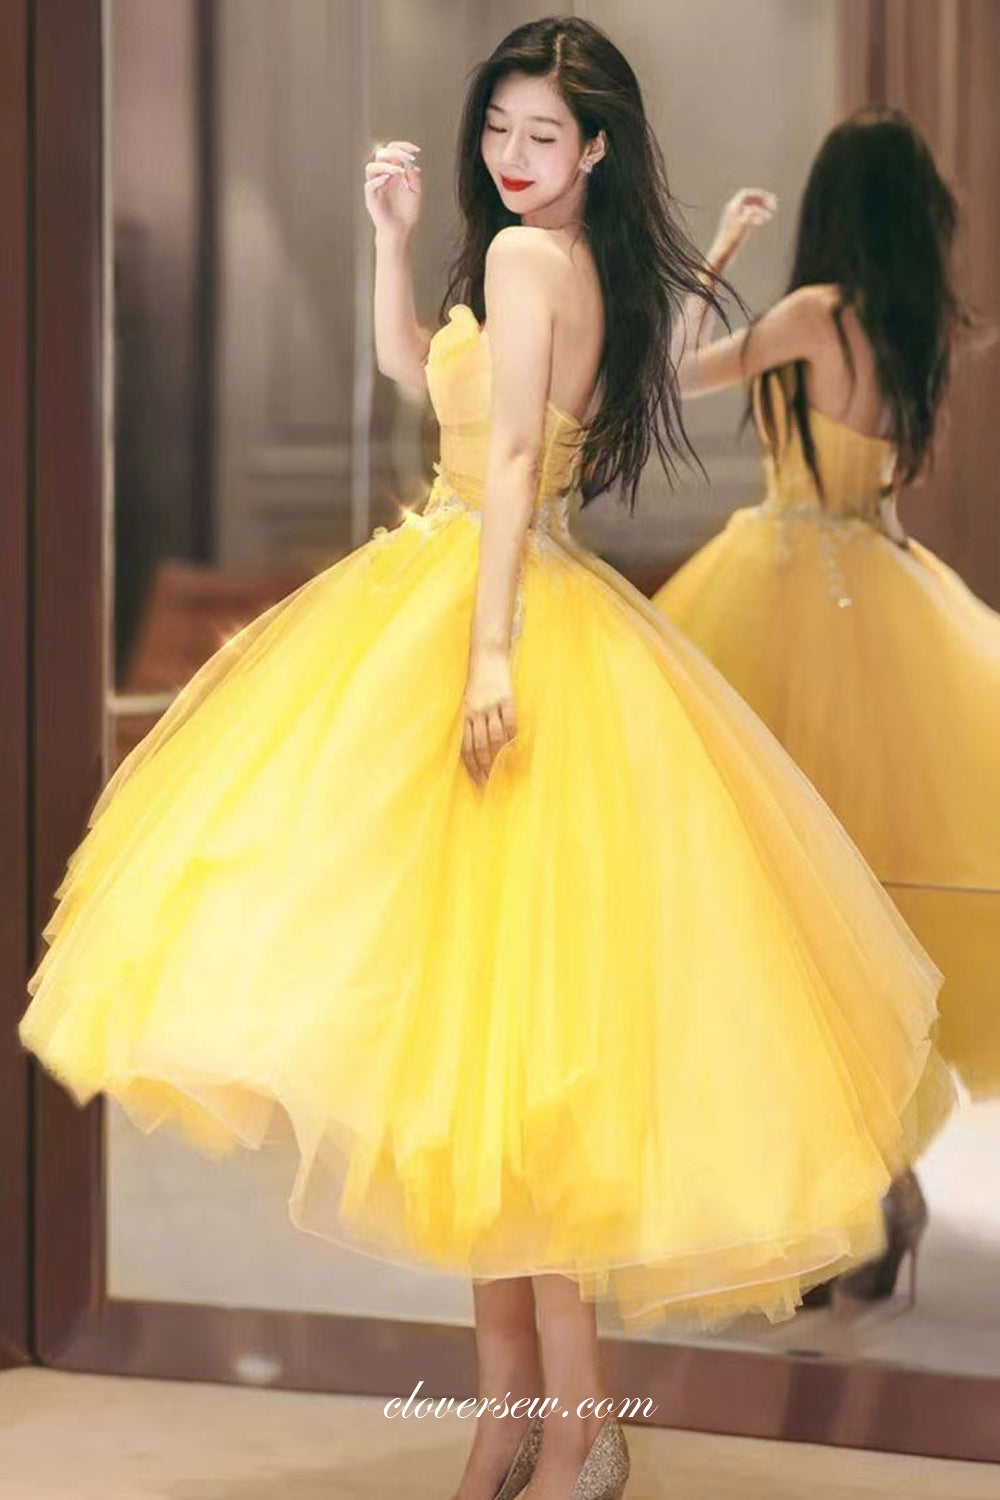 Bright Yellow Puffy Tulle 3D Applique Strapless Ball Gown Short Prom Dresses, CP1130